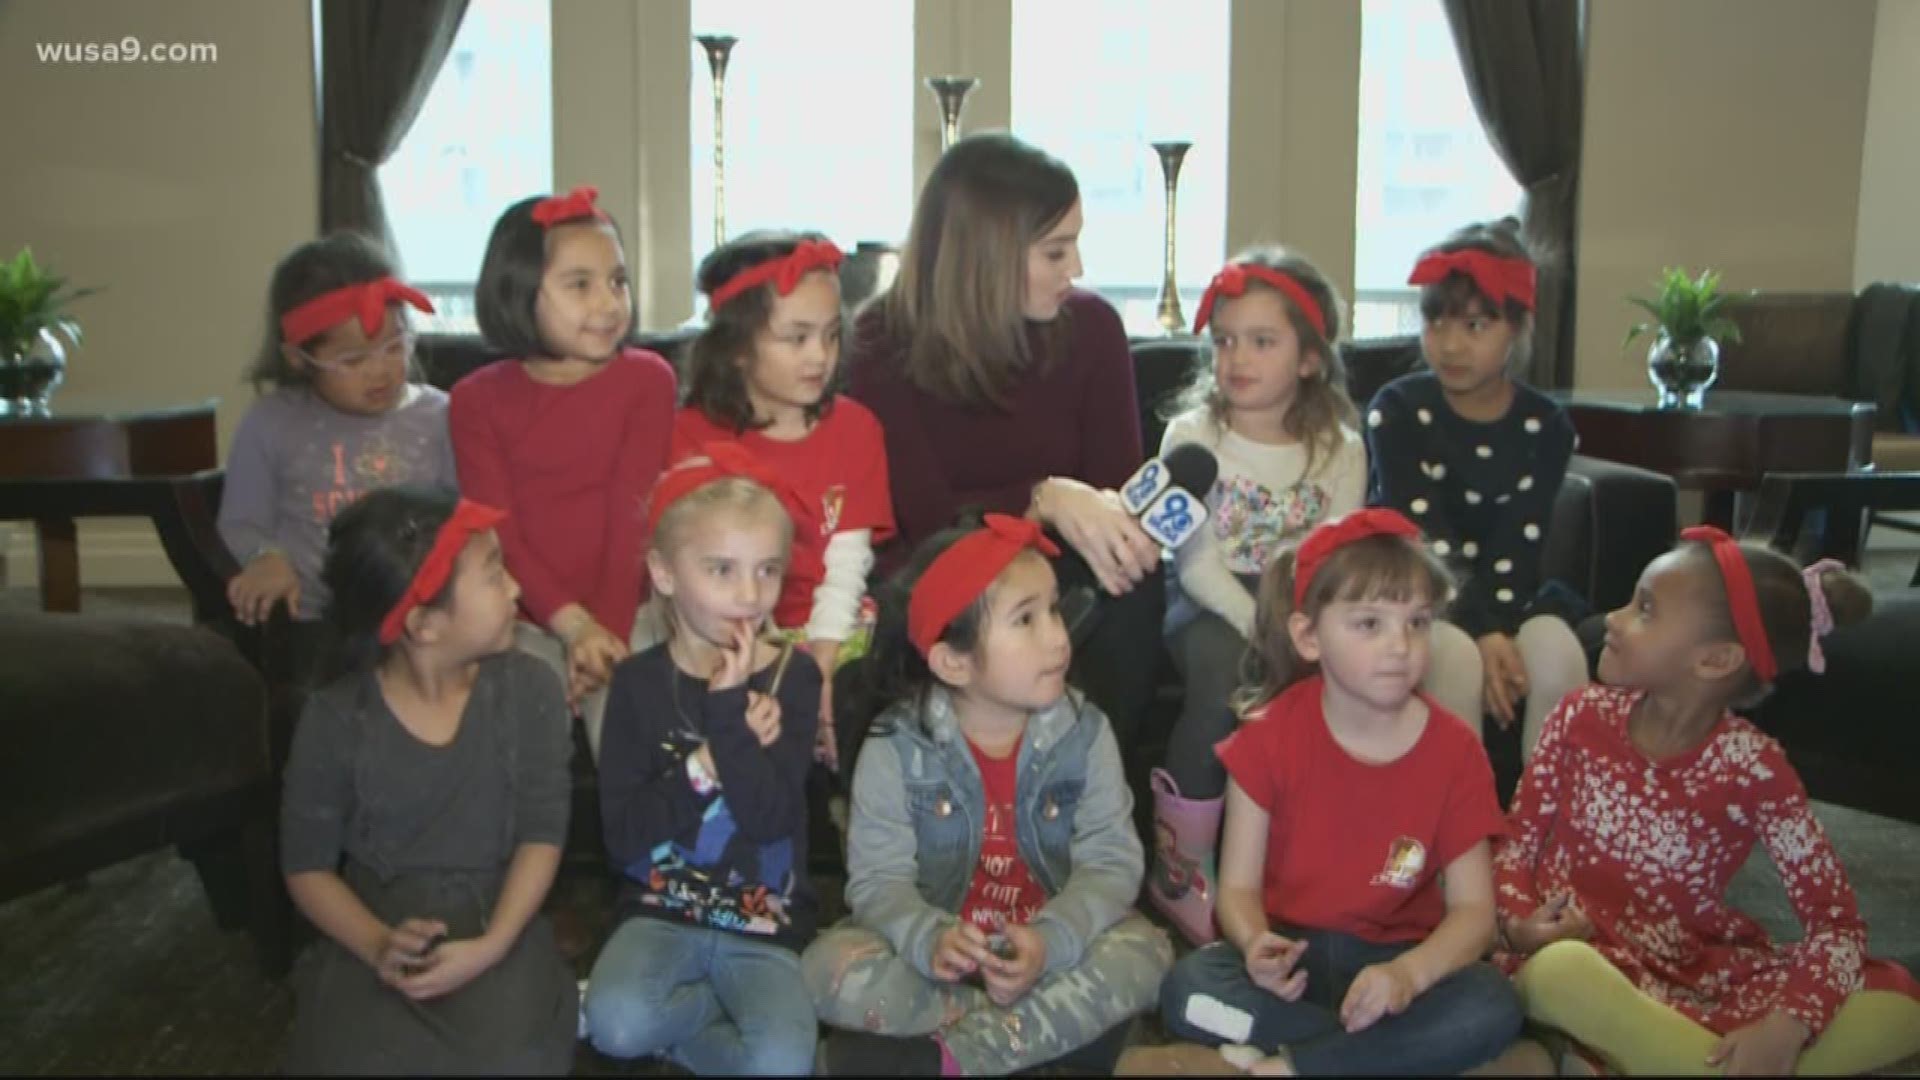 The Rosie Riveters-inspired STEM program is known for its unique science projects, bright red headbands and inspiring the next generation of young women.